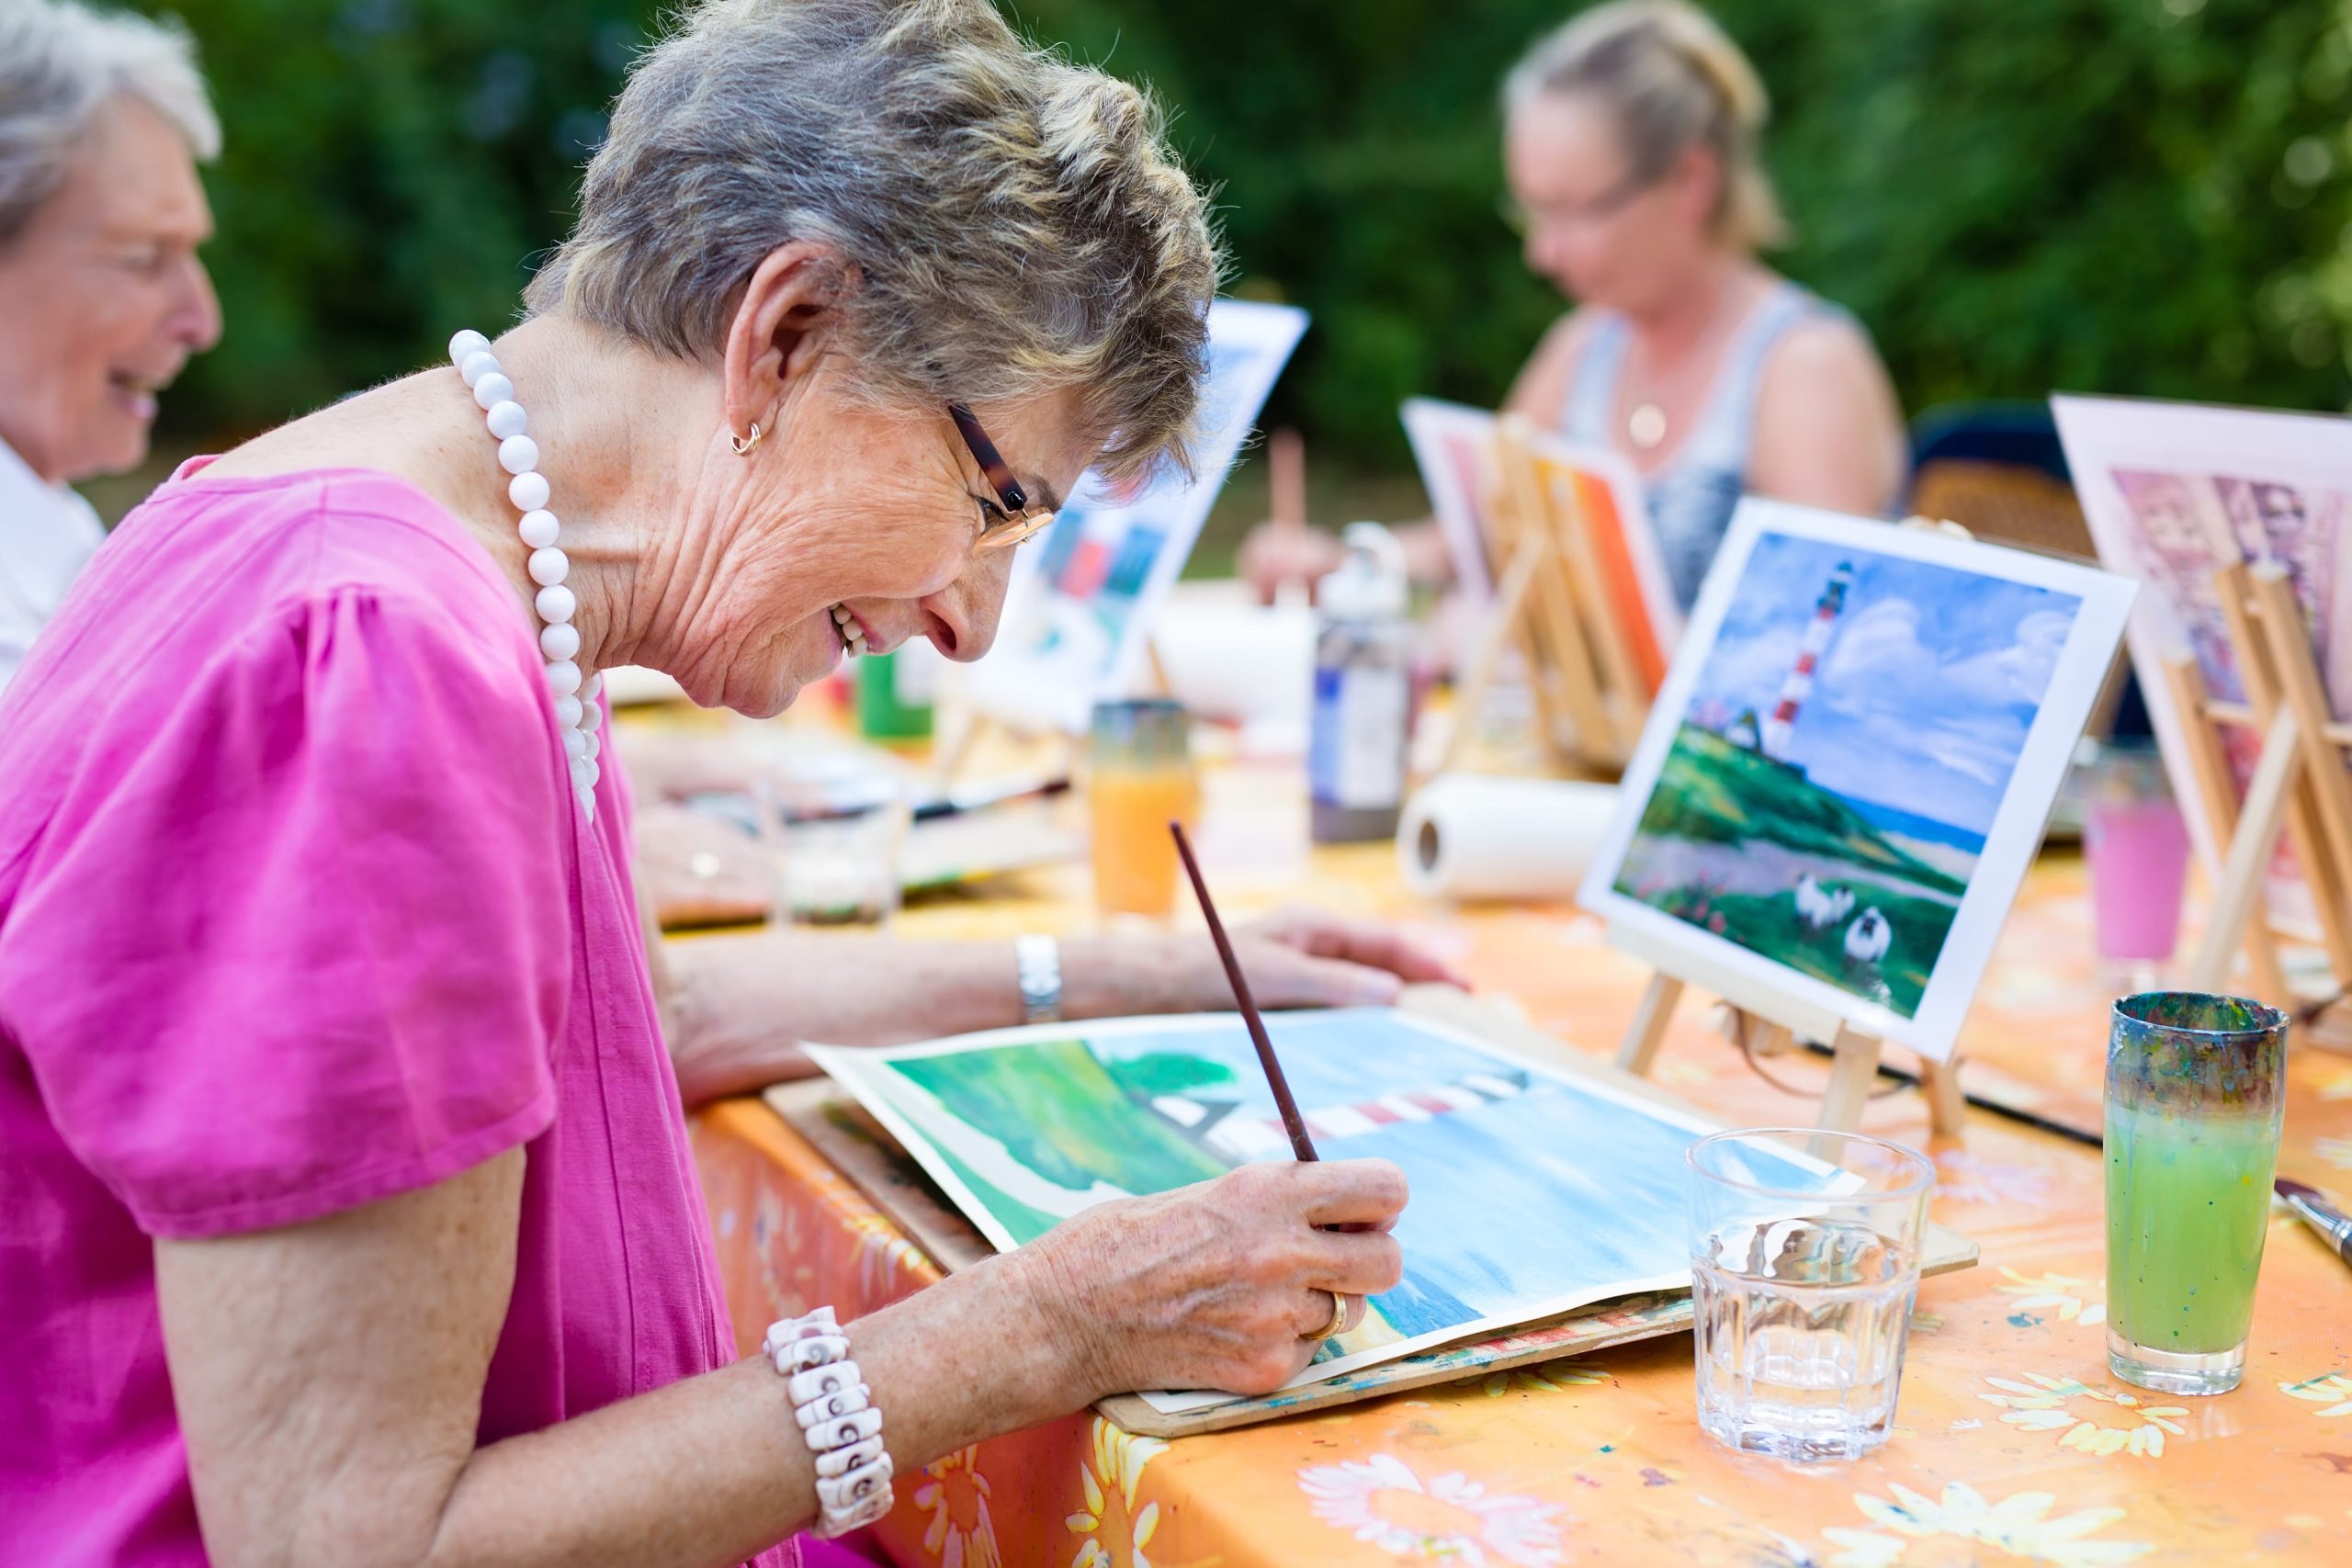 The role of therapy and activities for memory care patients